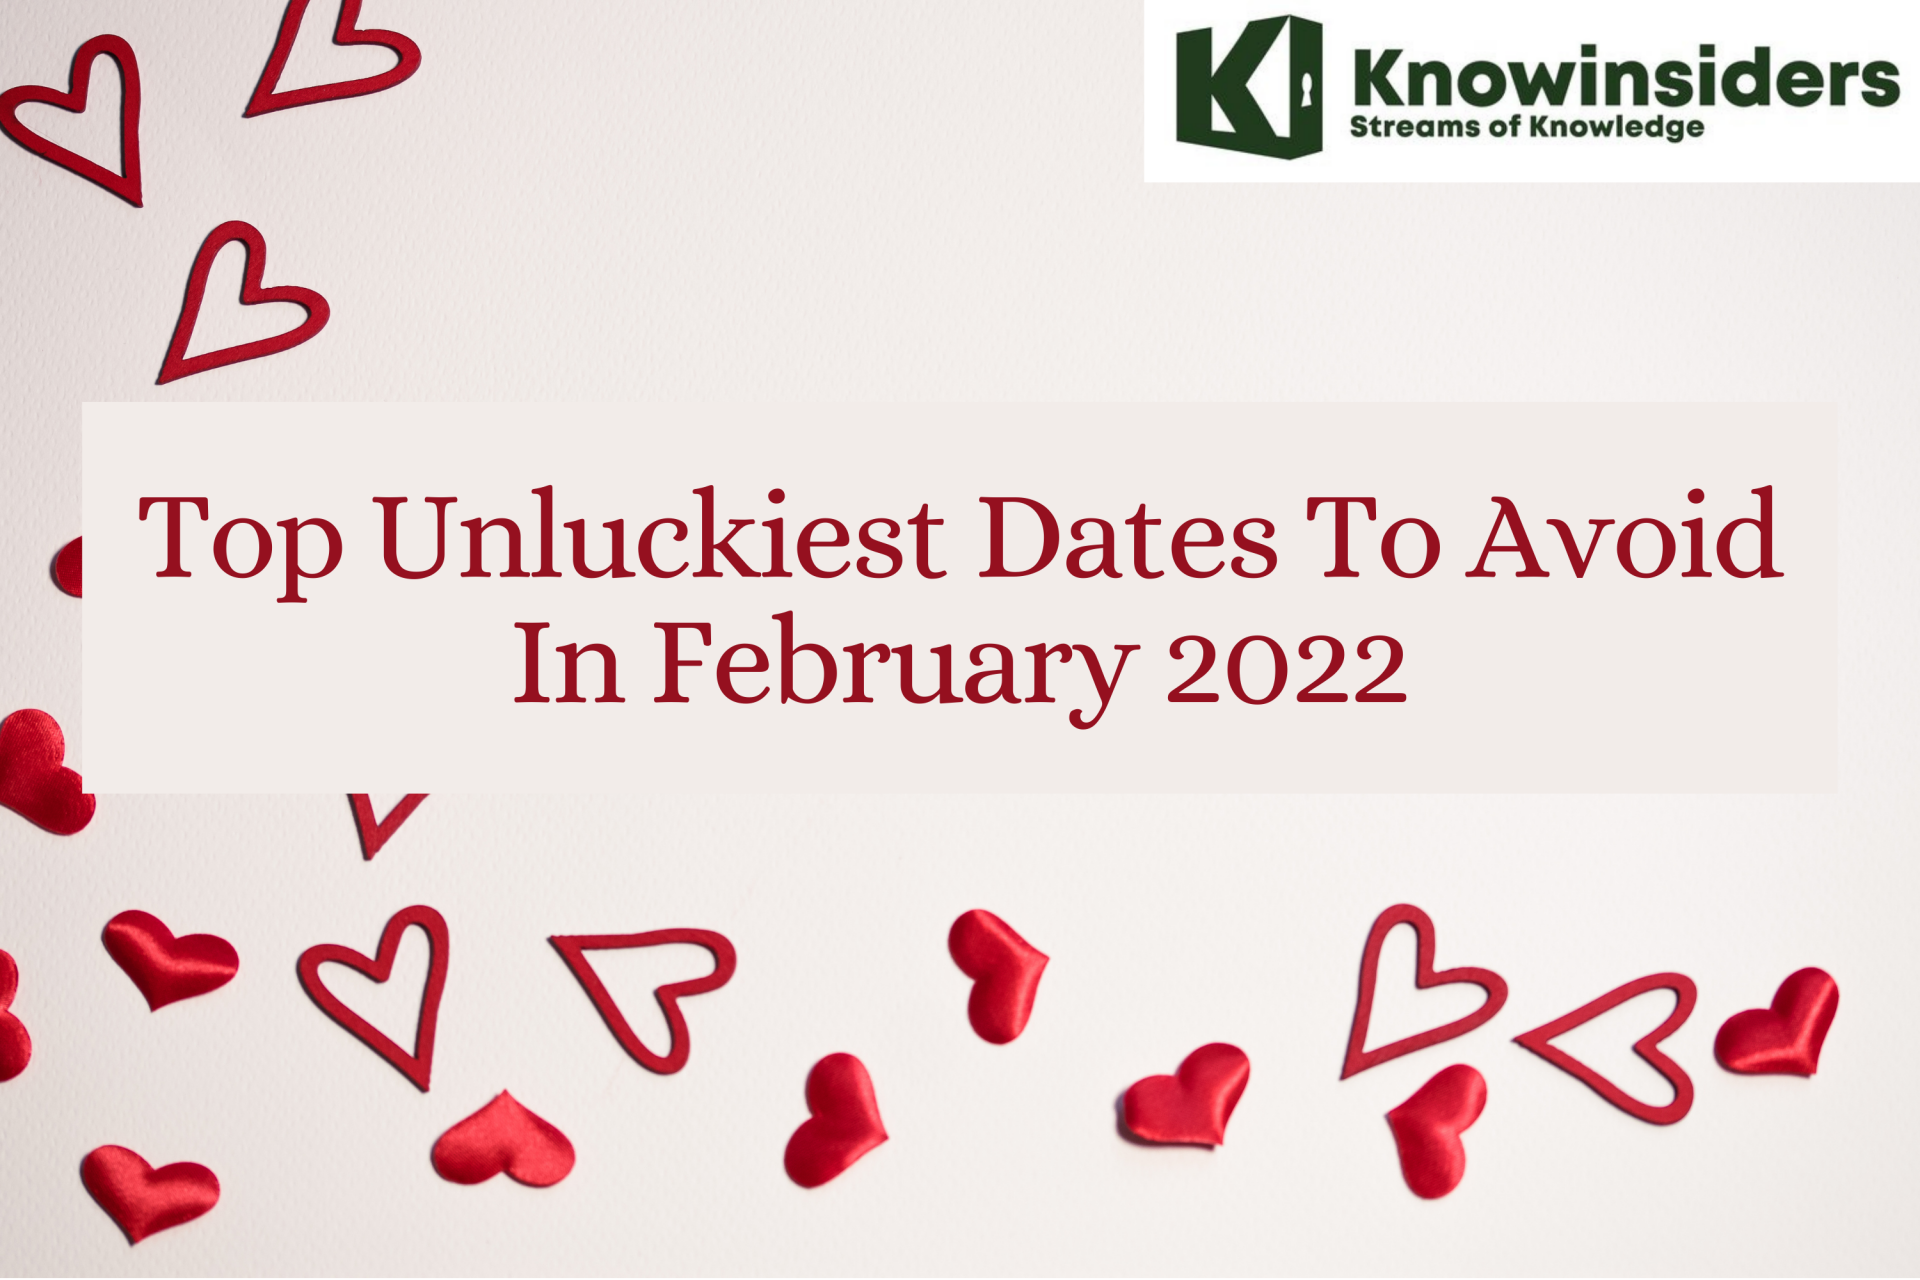 Unluckiest Dates To Avoid In February 2022